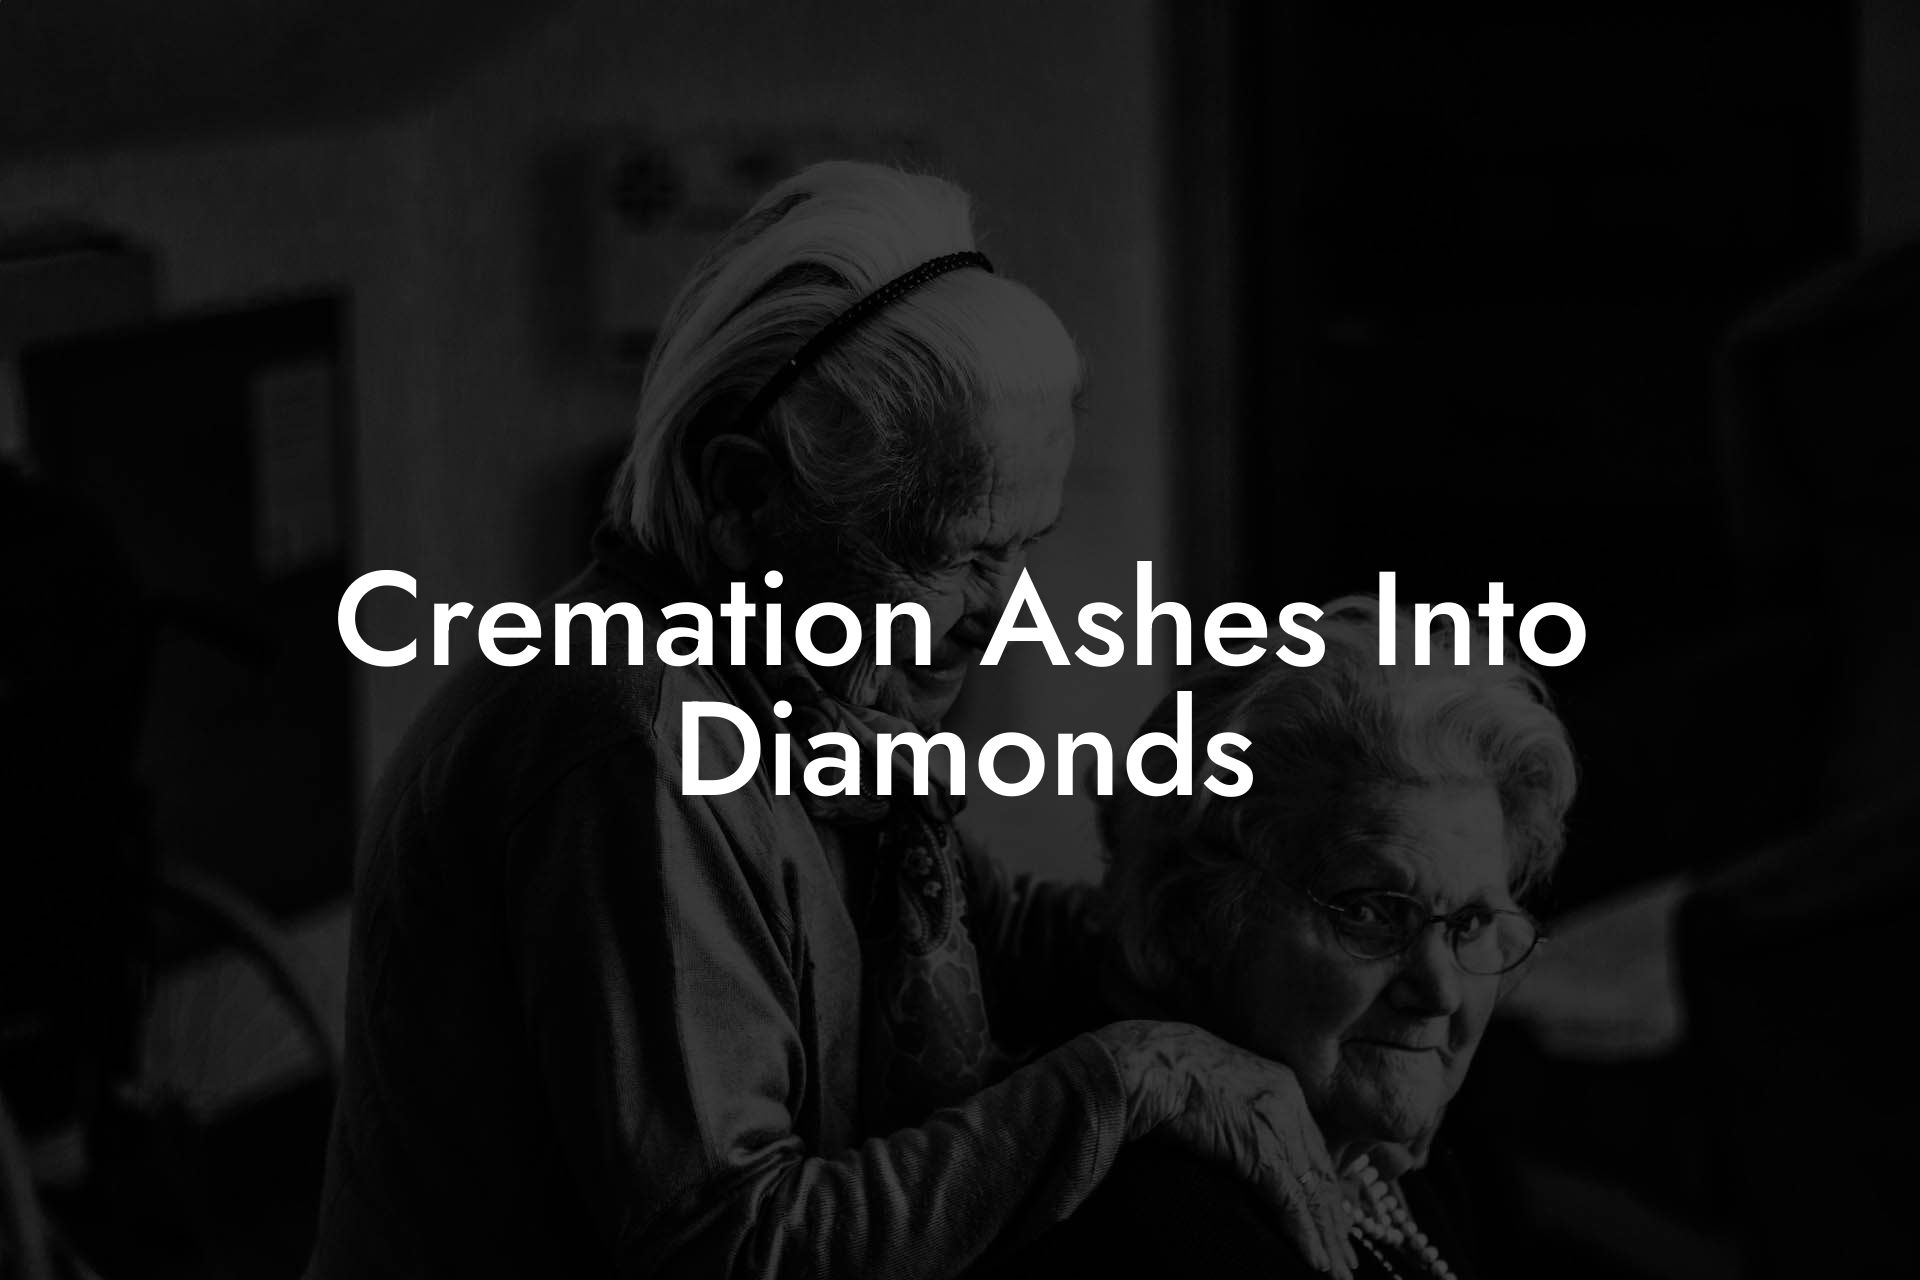 Cremation Ashes Into Diamonds